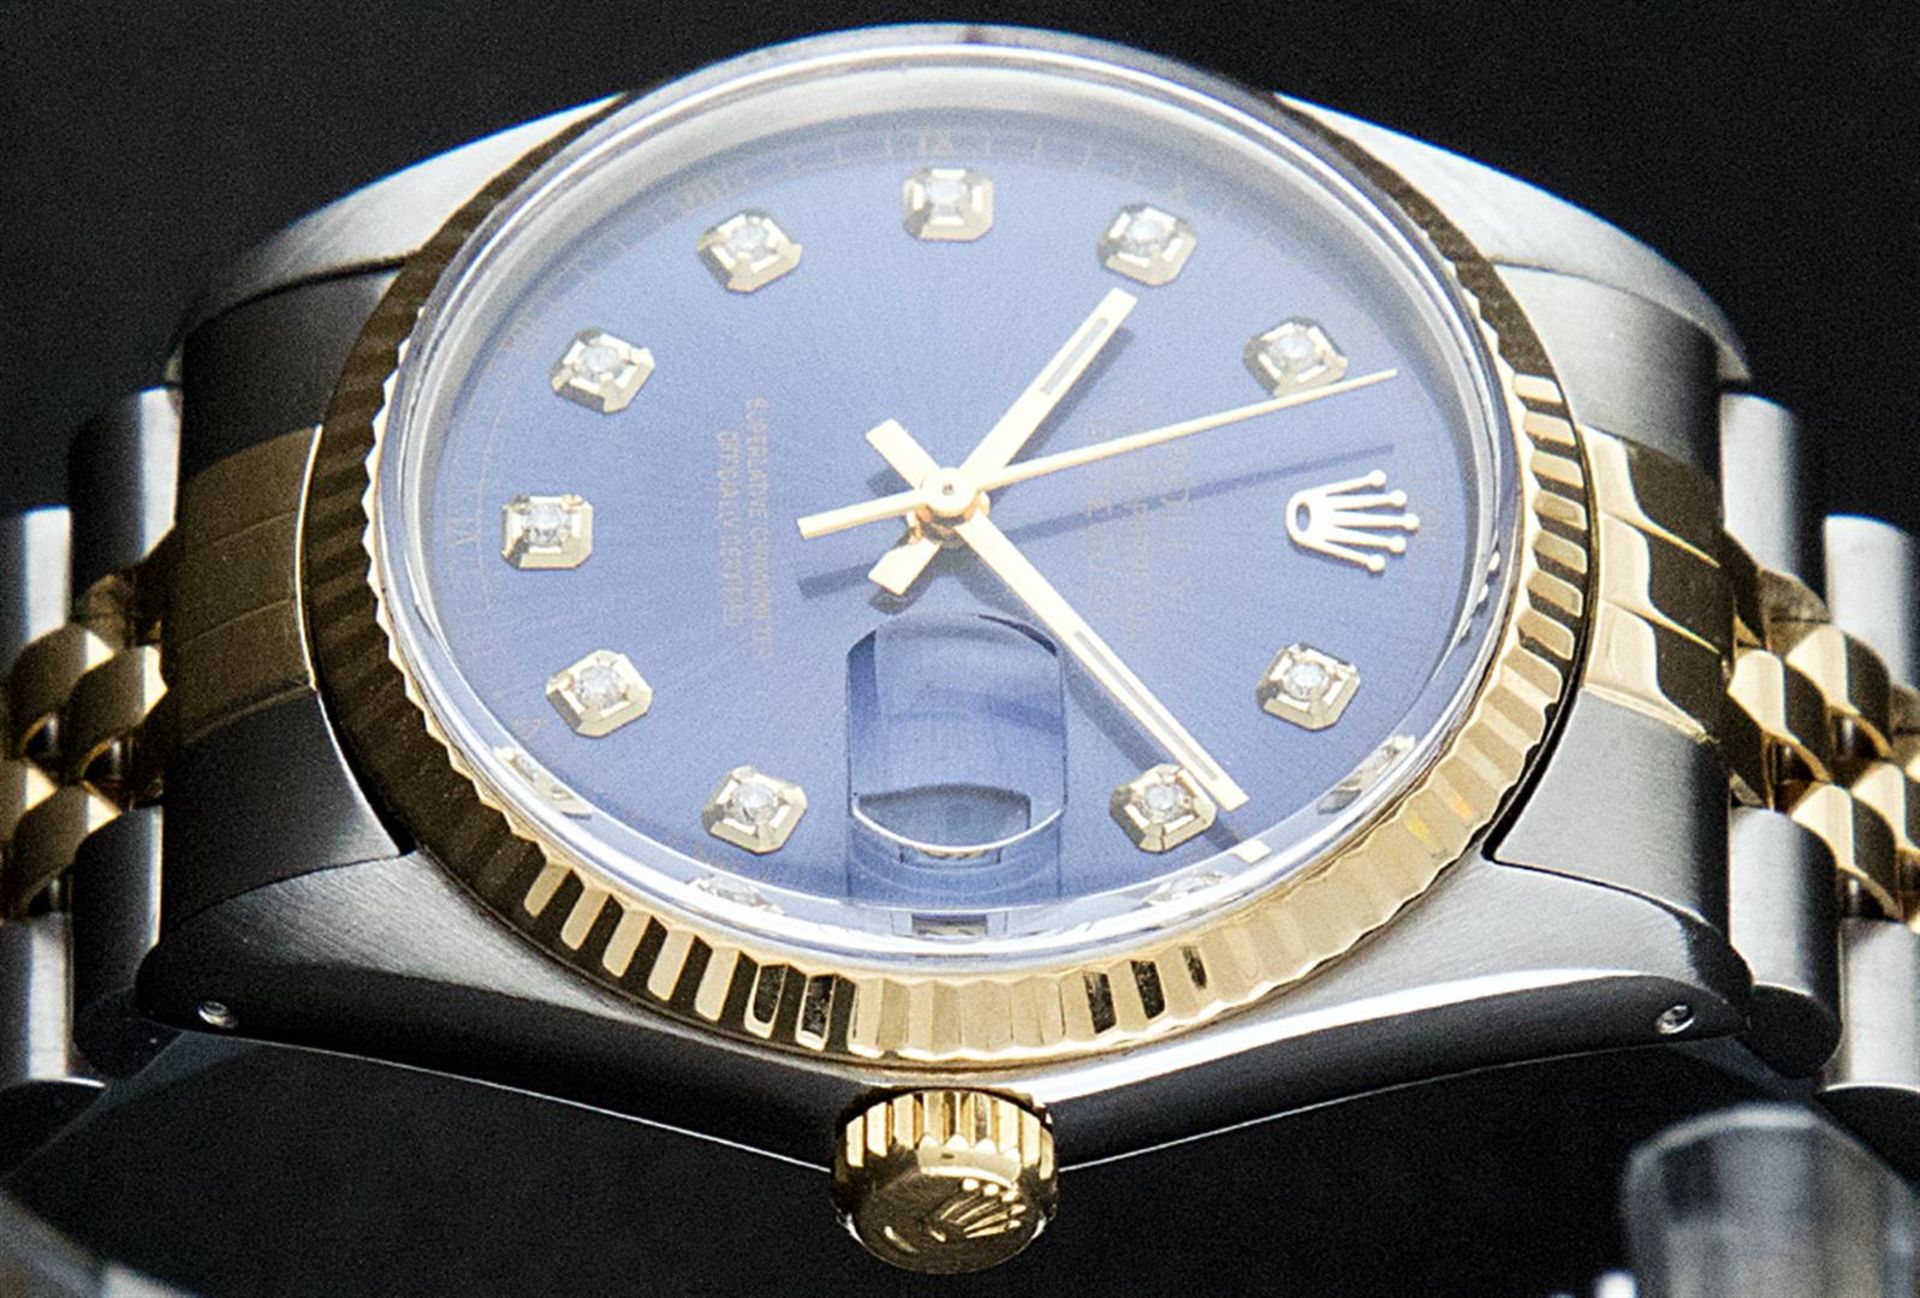 Rolex Mens 2 Tone Blue Diamond 36MM Oyster Perpetual Datejust Wristwatch - Image 2 of 9